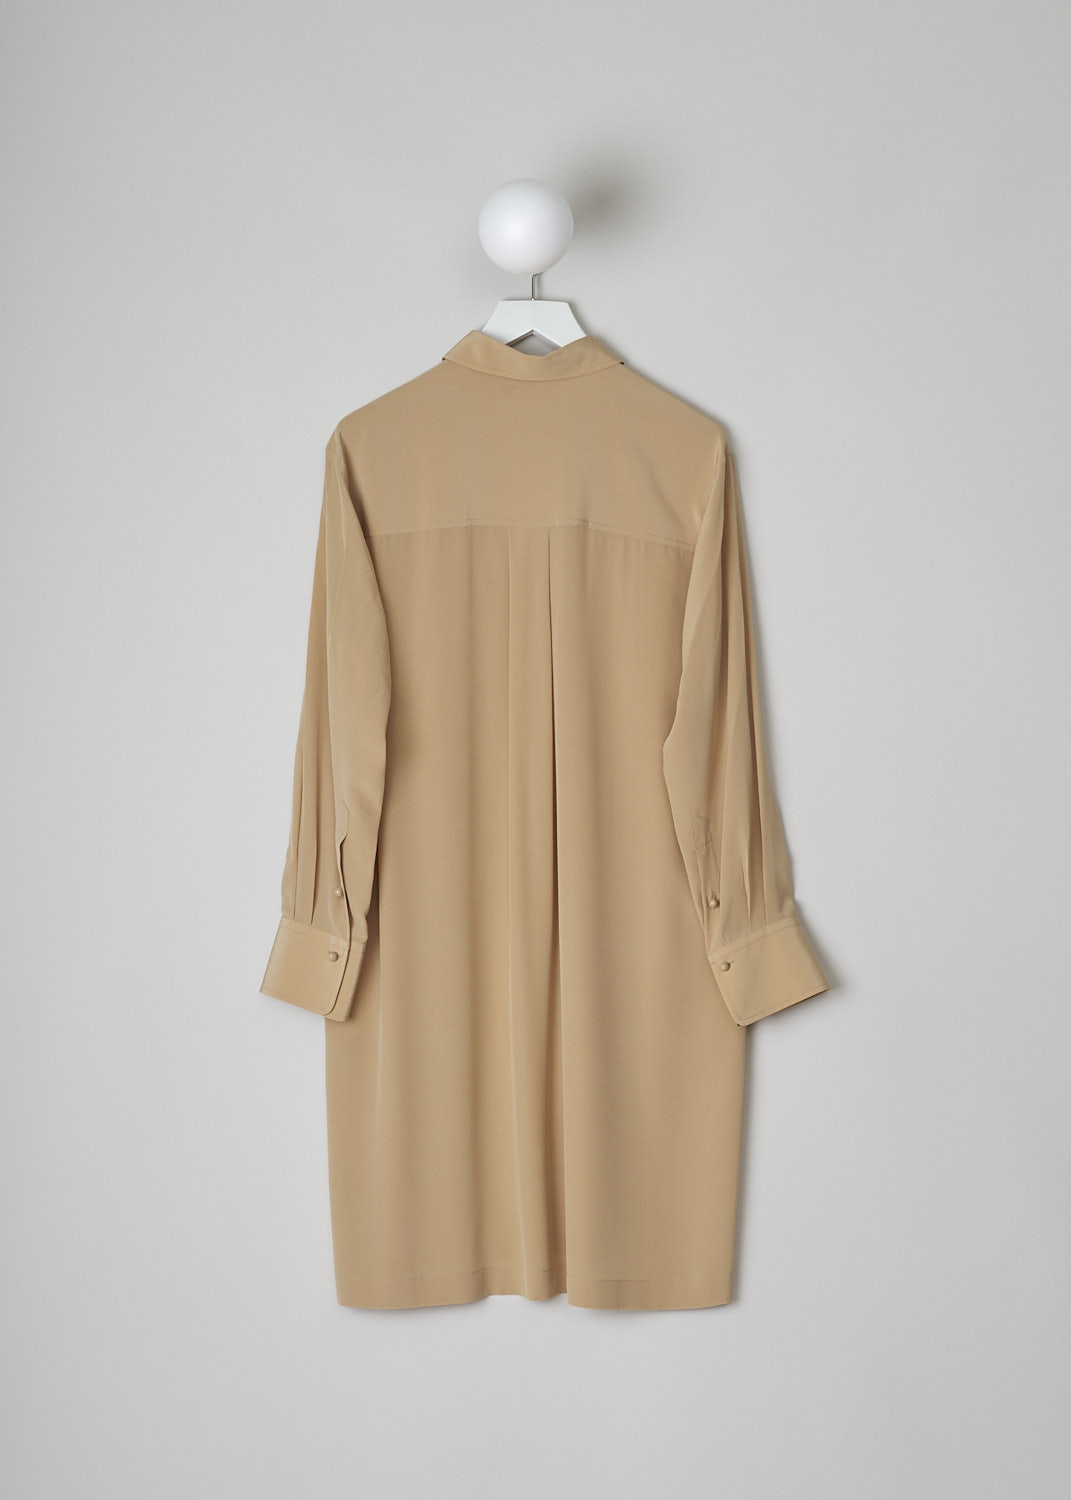 CHLOÉ, PEARL BEIGE SILK SHIRT DRESS, CHC22URO64004278, Beige, Back, This pearl beige silk dress has a classic collar and a button placket with round ceramic buttons that go halfway across the chest. Below the placket, a single knife pleats goes down to the hemline. This loose fitted dress has long sleeves with buttoned cuffs. Slanted pockets are concealed in the side seam. The dress has side slits and an asymmetrical finish, meaning the back is a little longer than the front. A centre box pleat runs vertically down the back.
